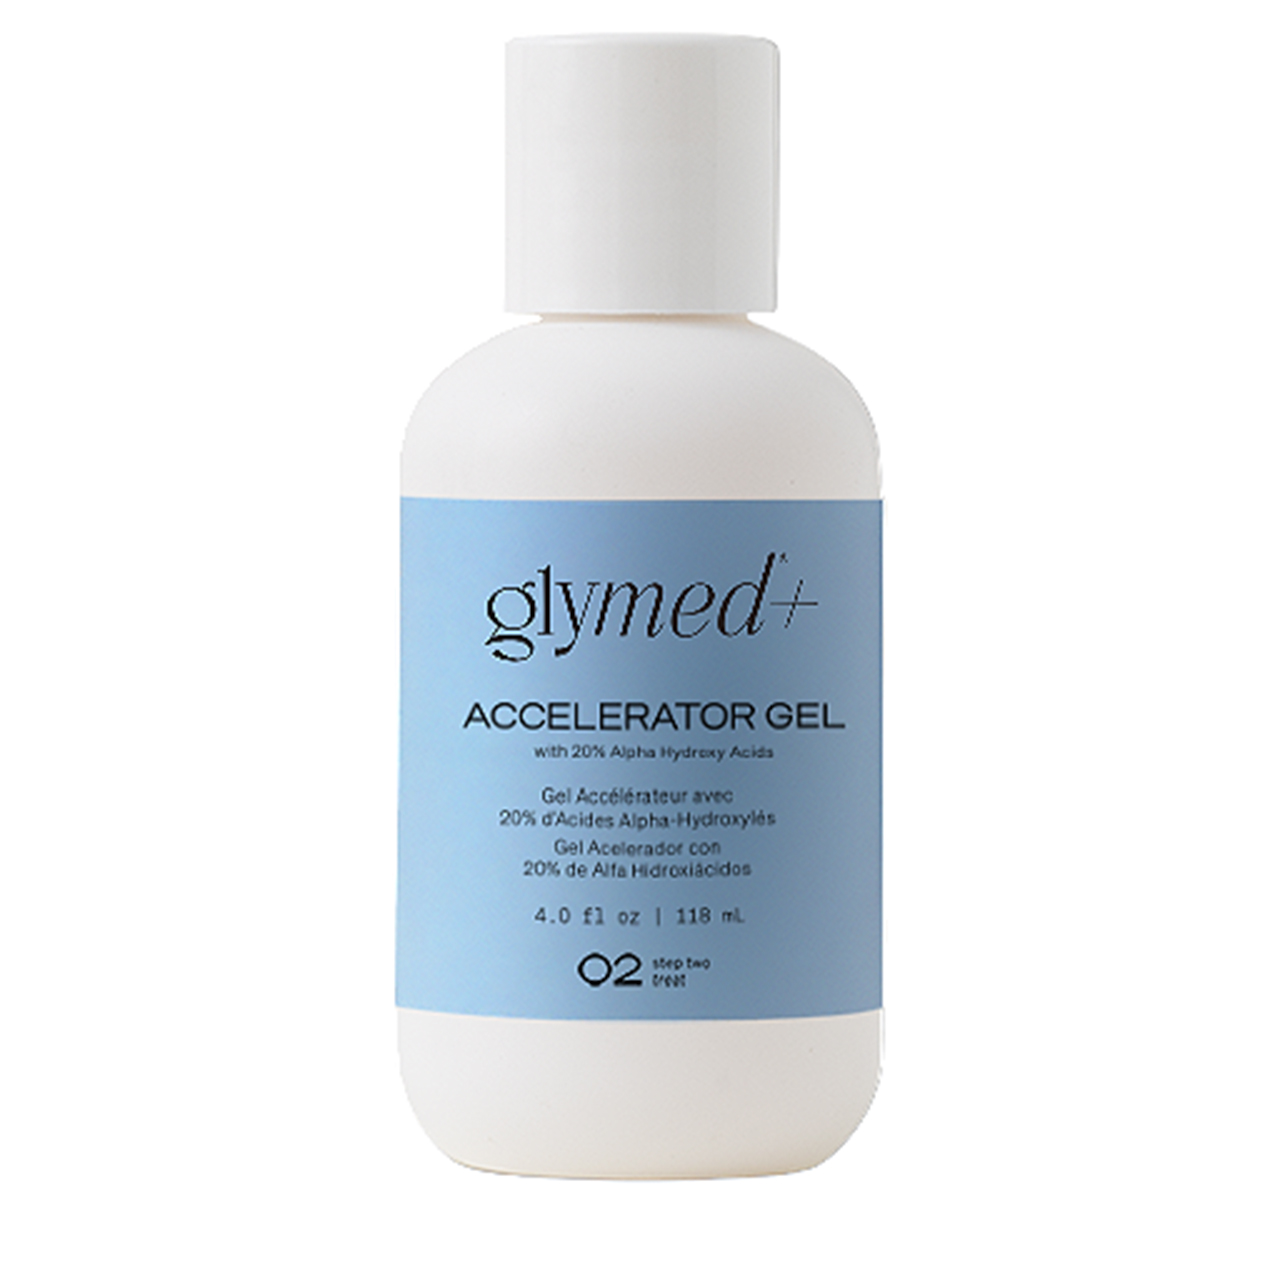 Glymed Plus Accelerator Gel with 20% Alpha Hydroxy Acids - 4 oz Questions & Answers